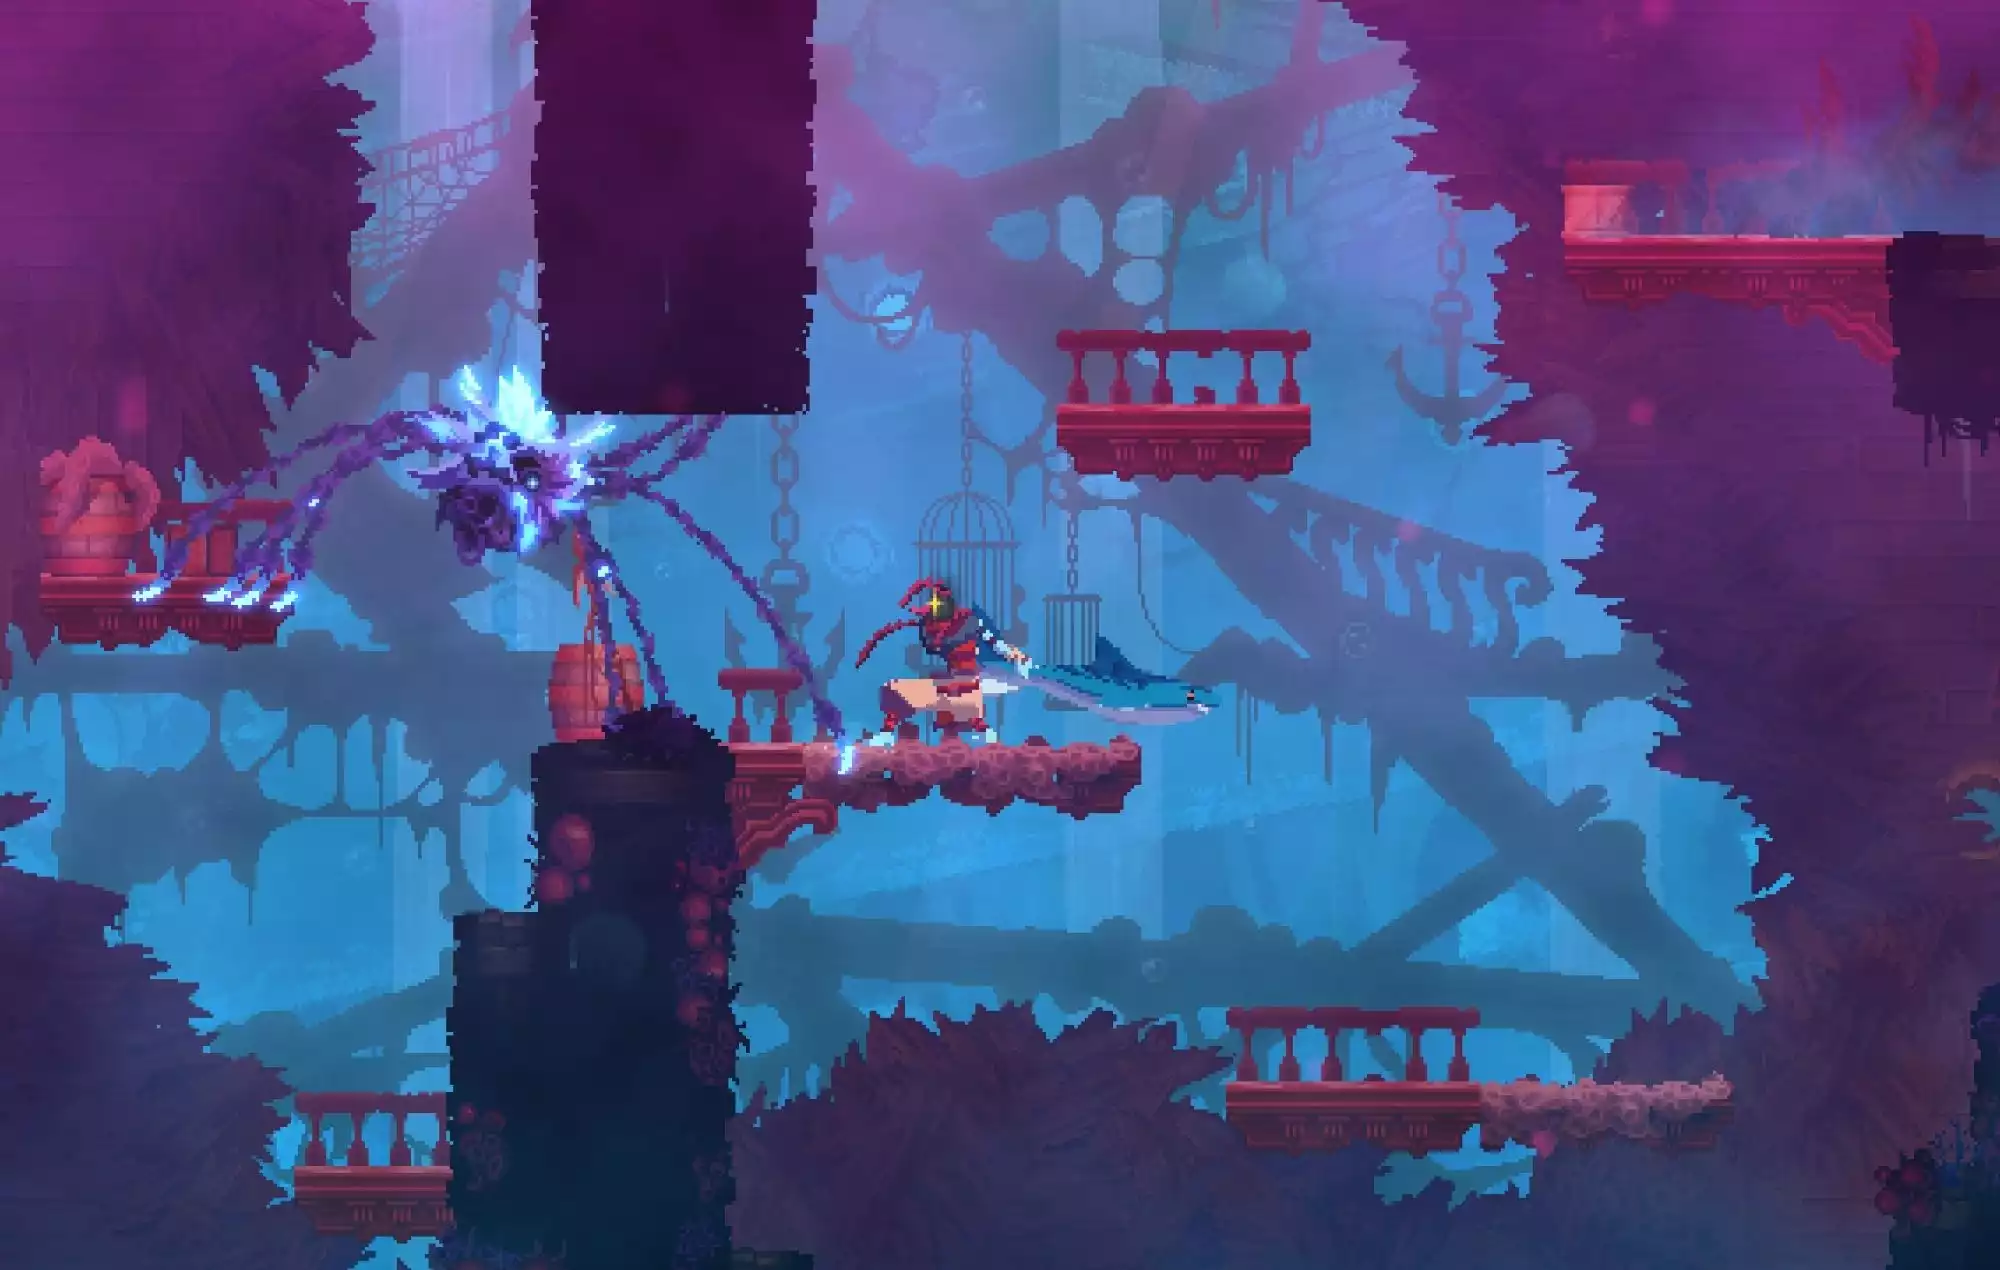 Evil Empire is done with Dead Cells - new projects are coming